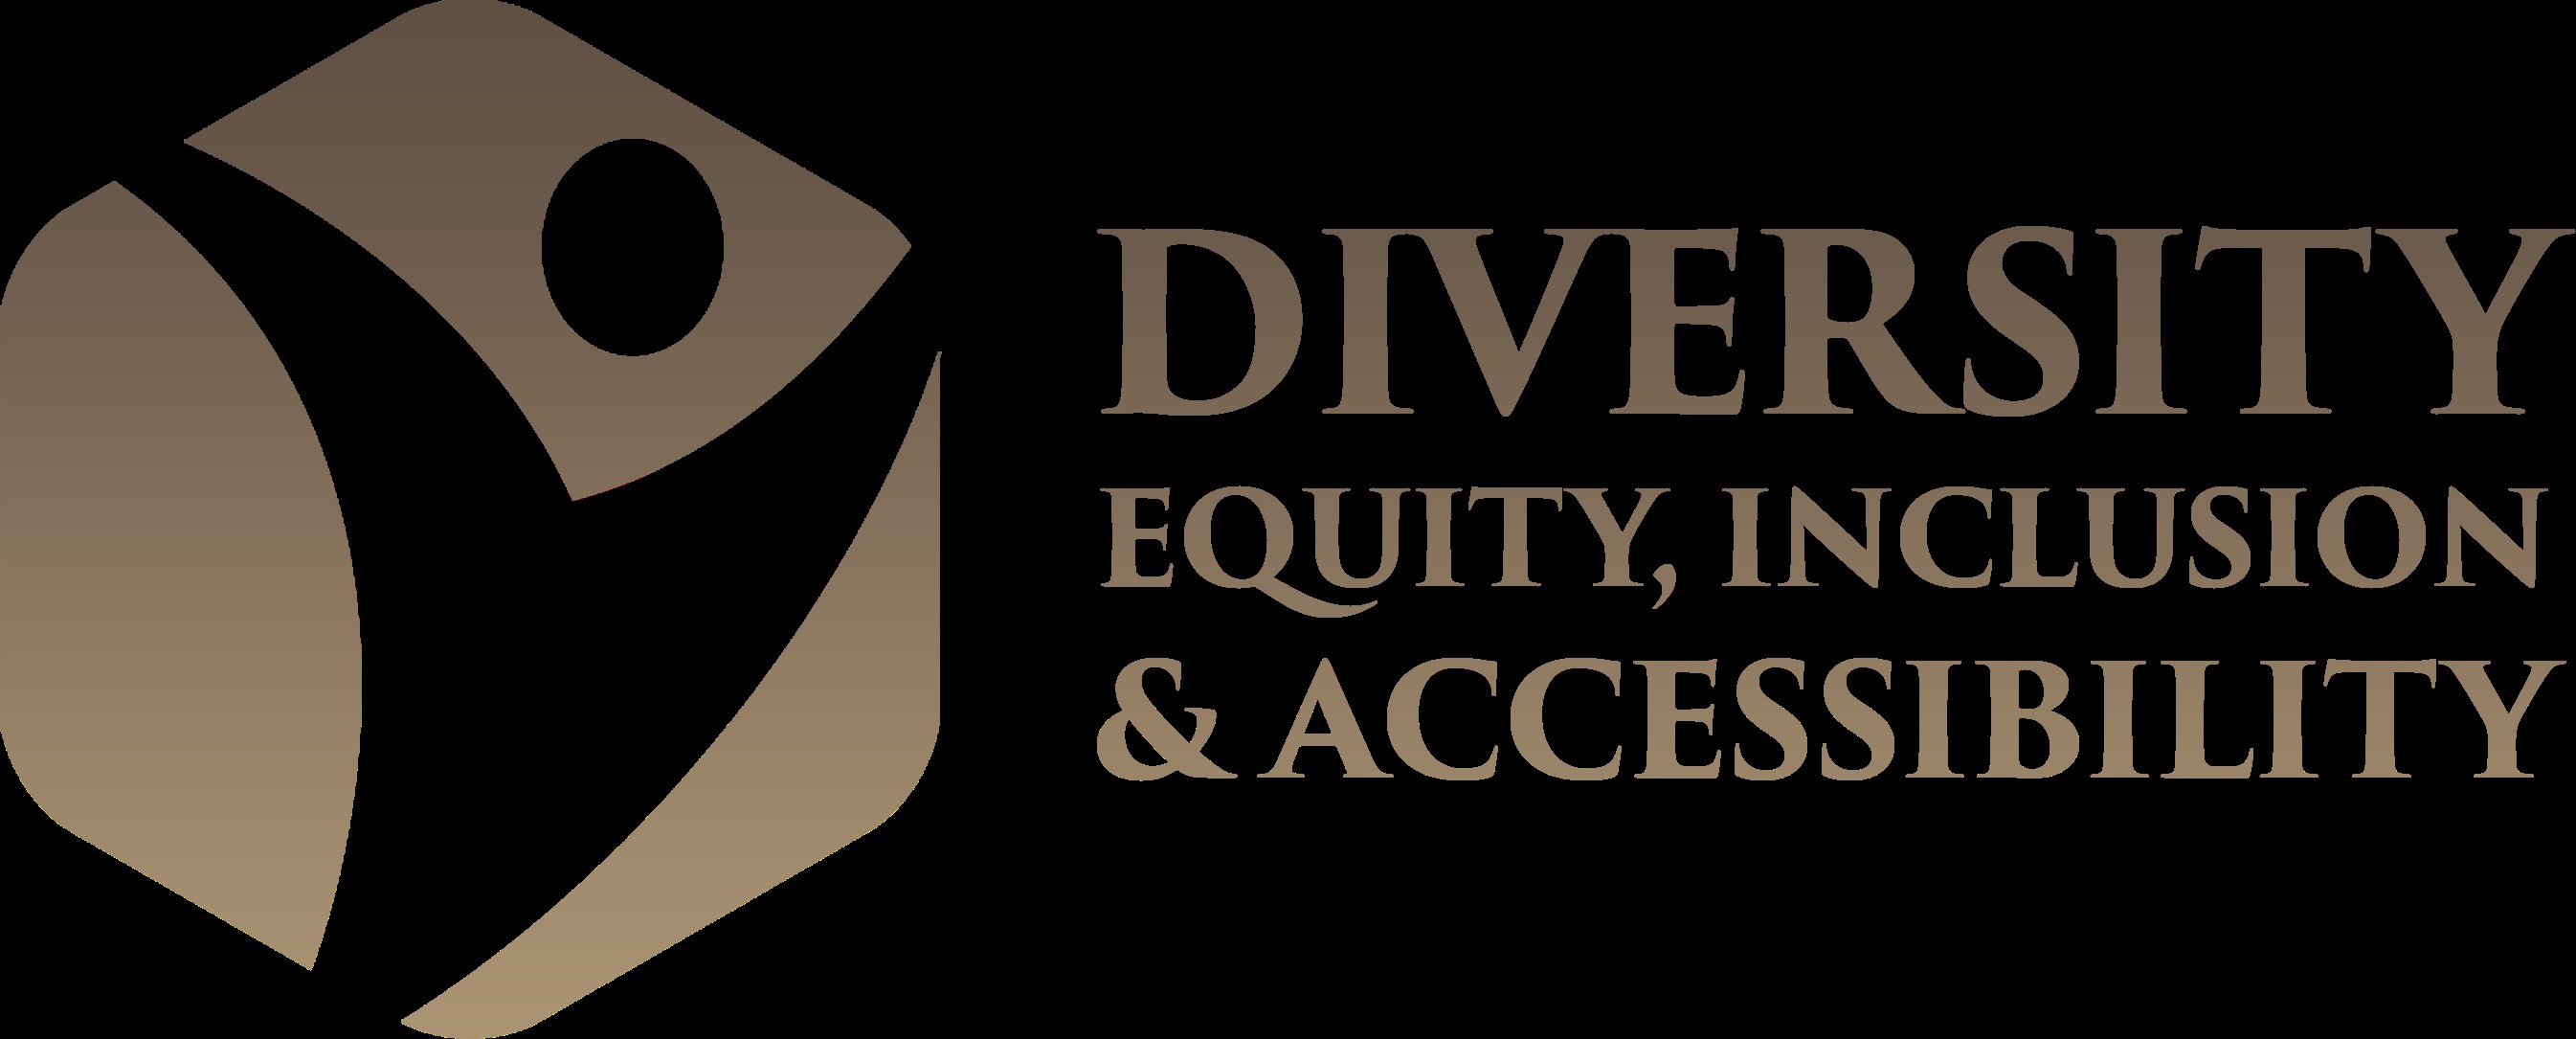 Diversity, Equity, Inclusion & Accessibility Logo